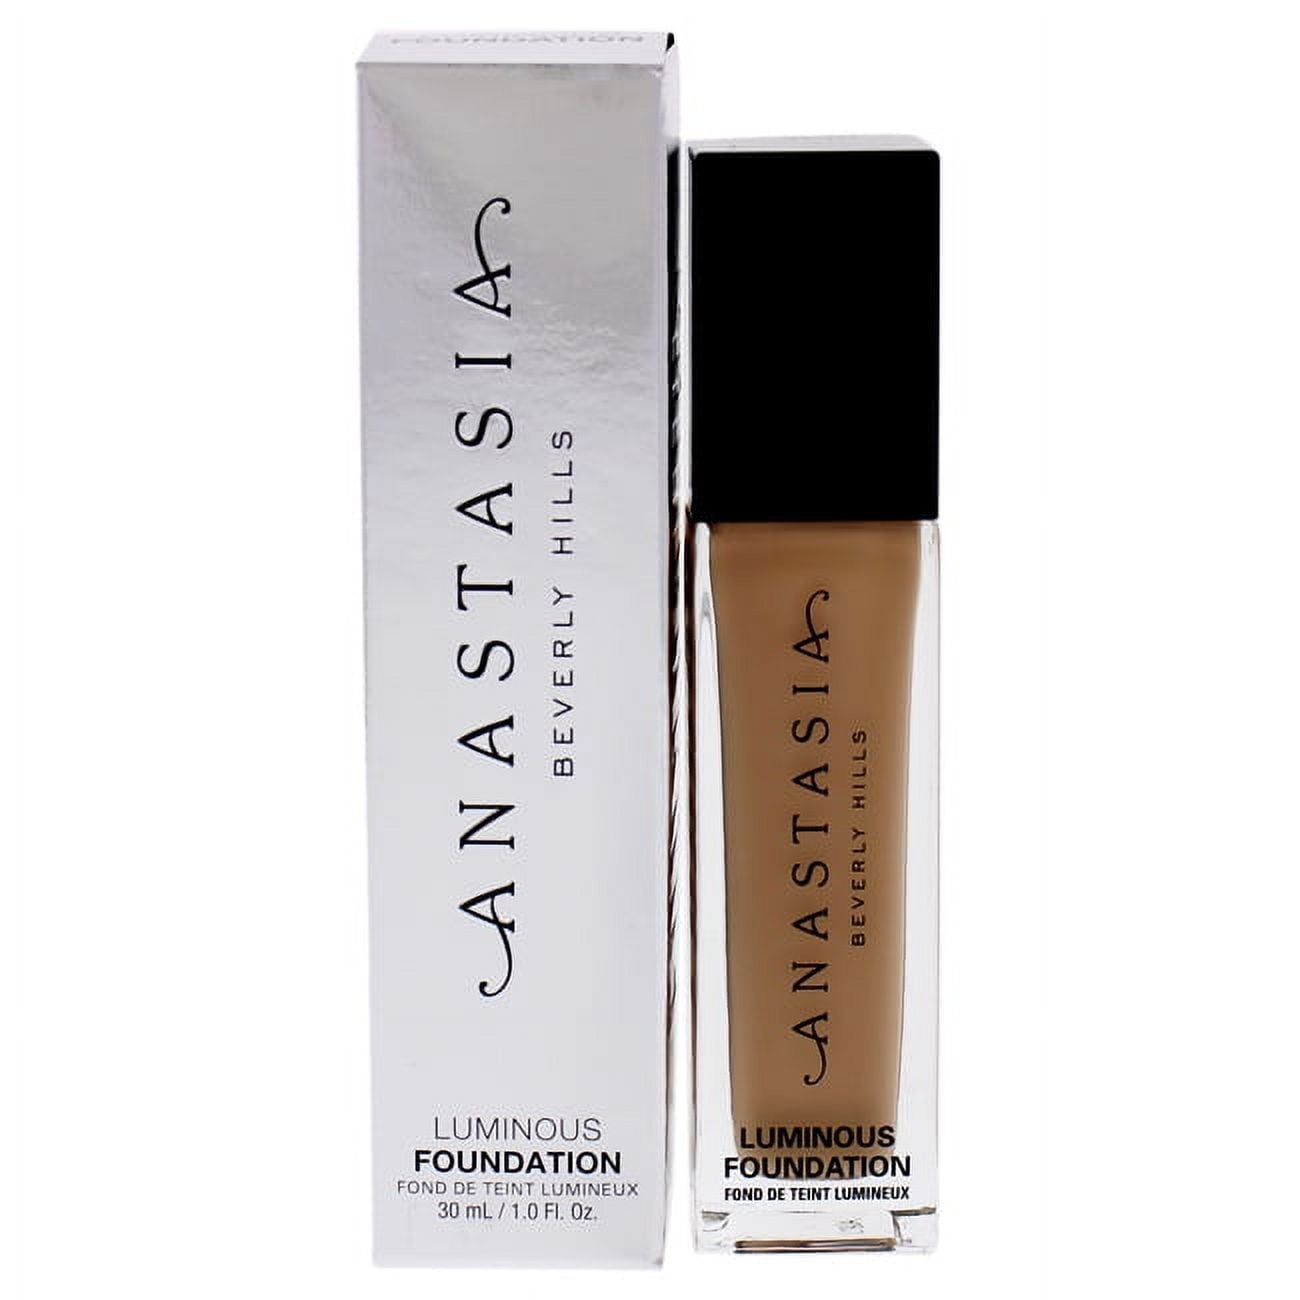 Anastasia for Luminous Hills Women - Beverly Foundation 1 oz 260N Foundation - by